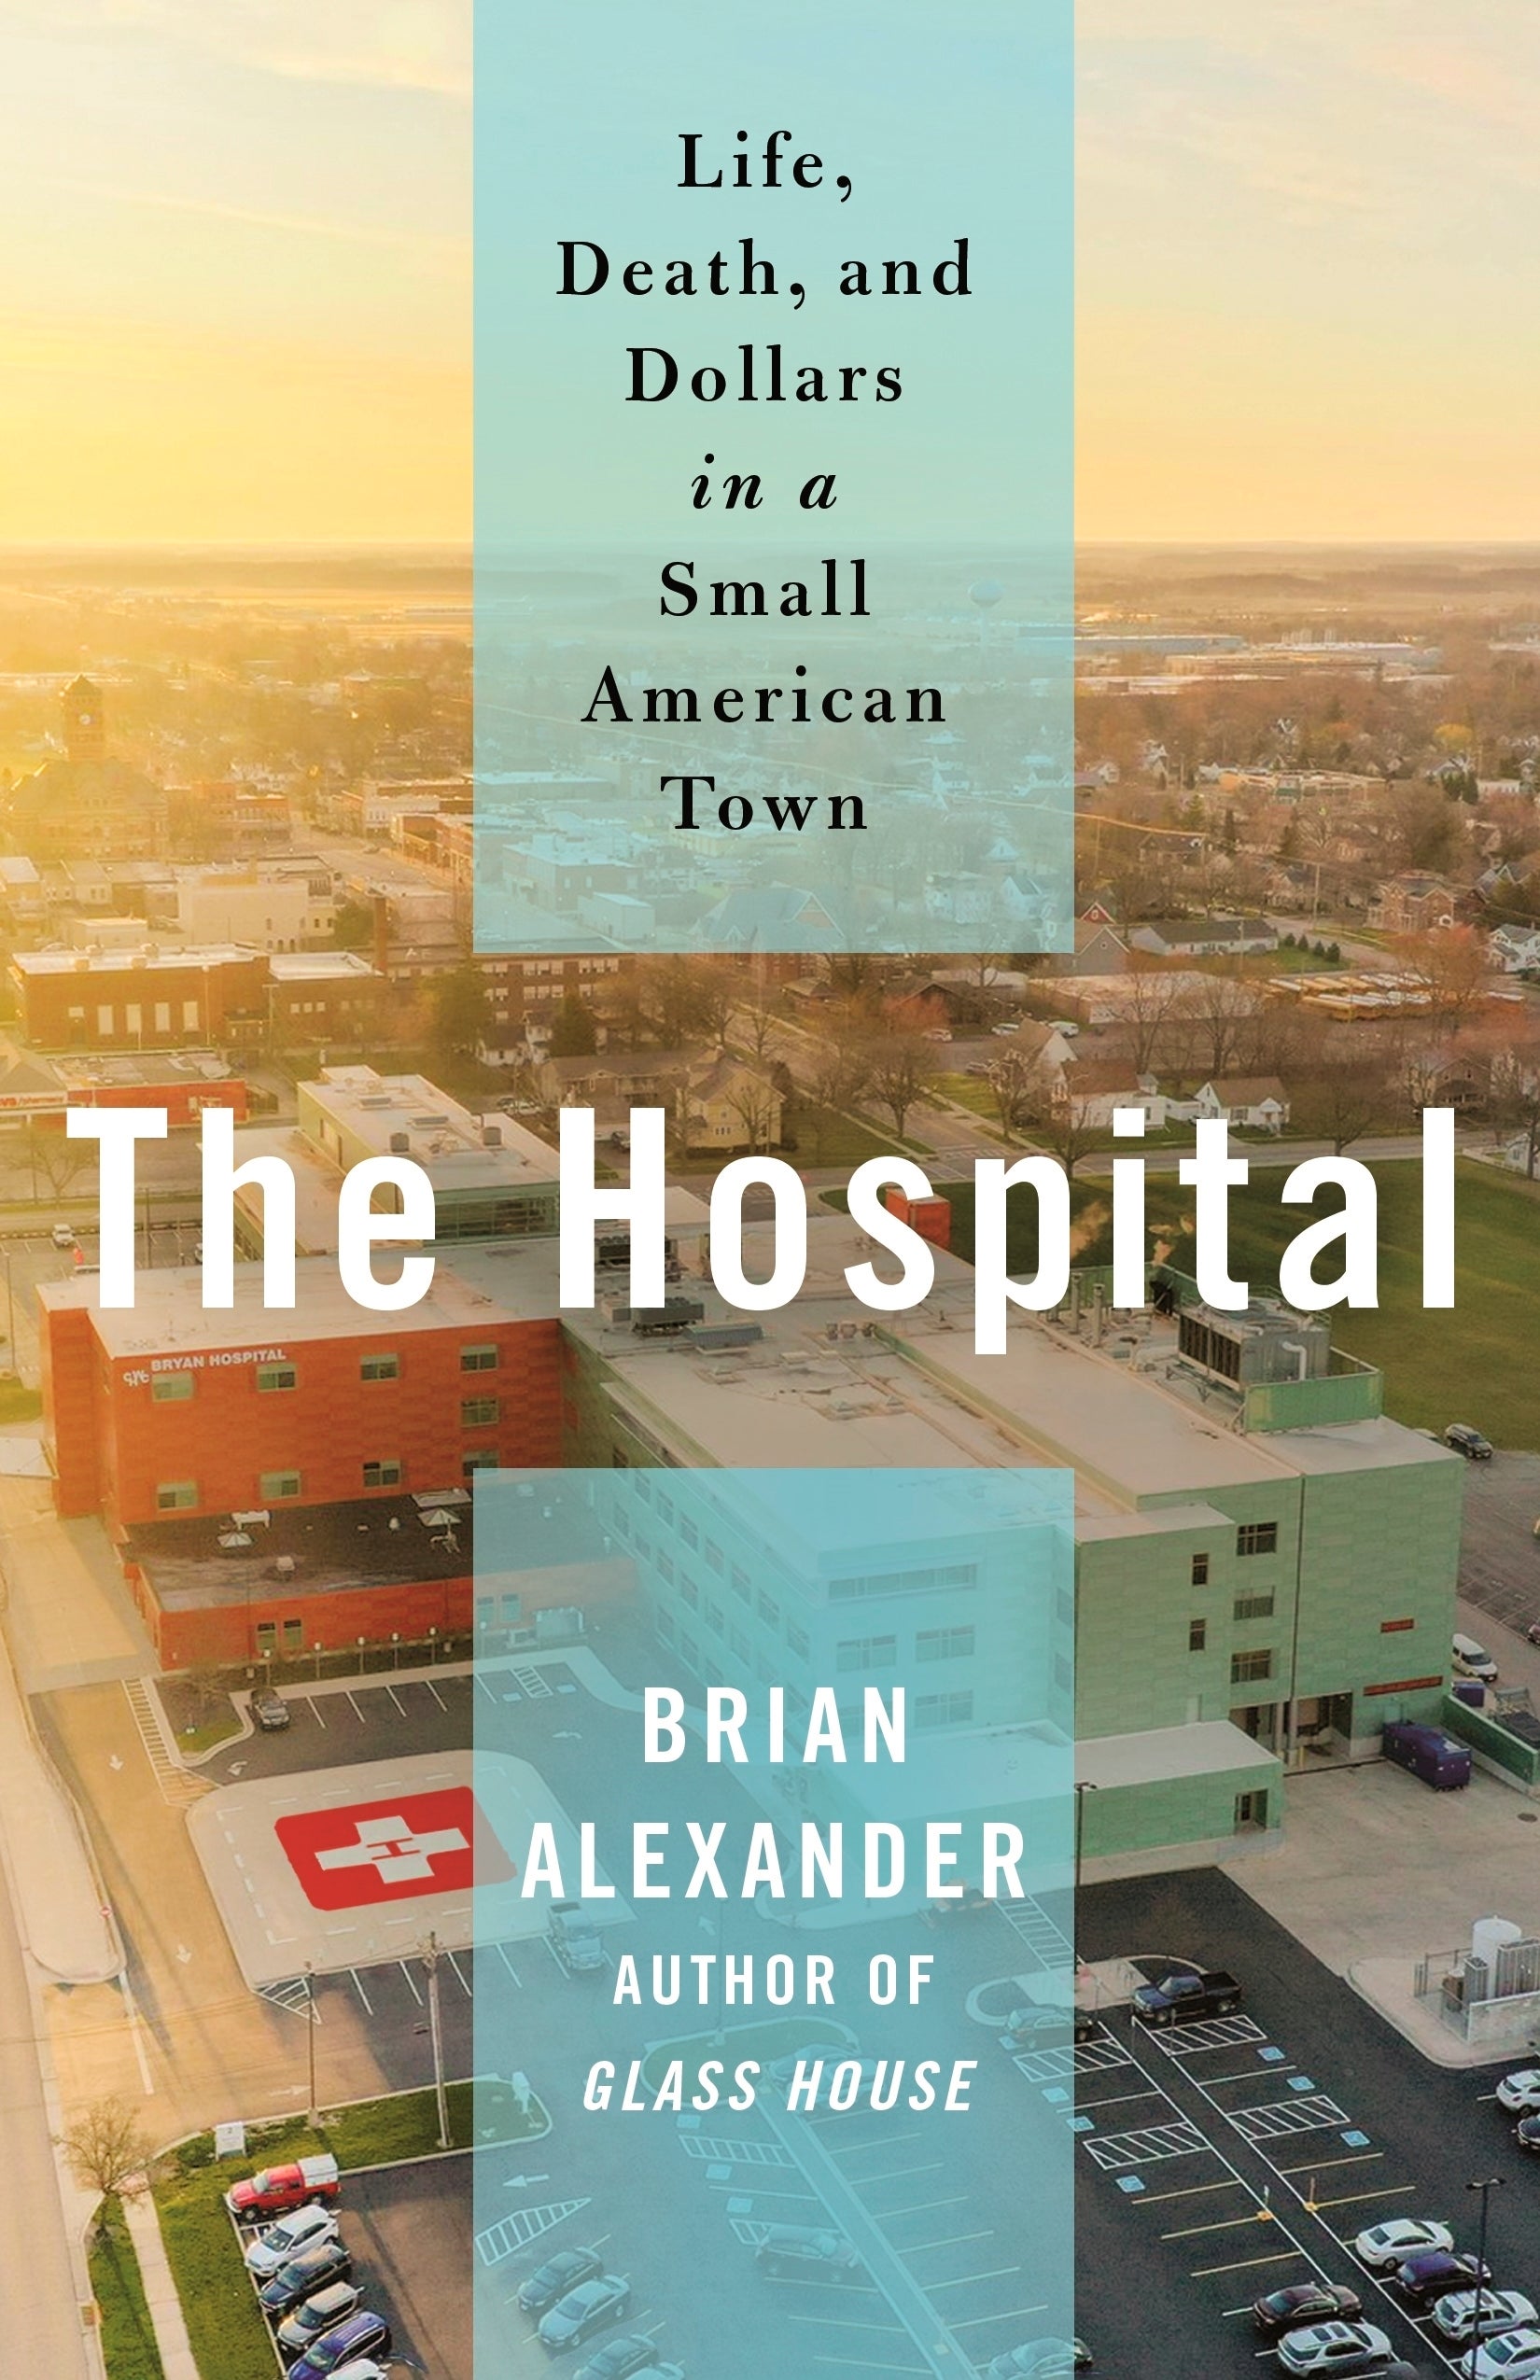 Book Review - The Hospital: Life, Death, and Dollars in a Small American Town